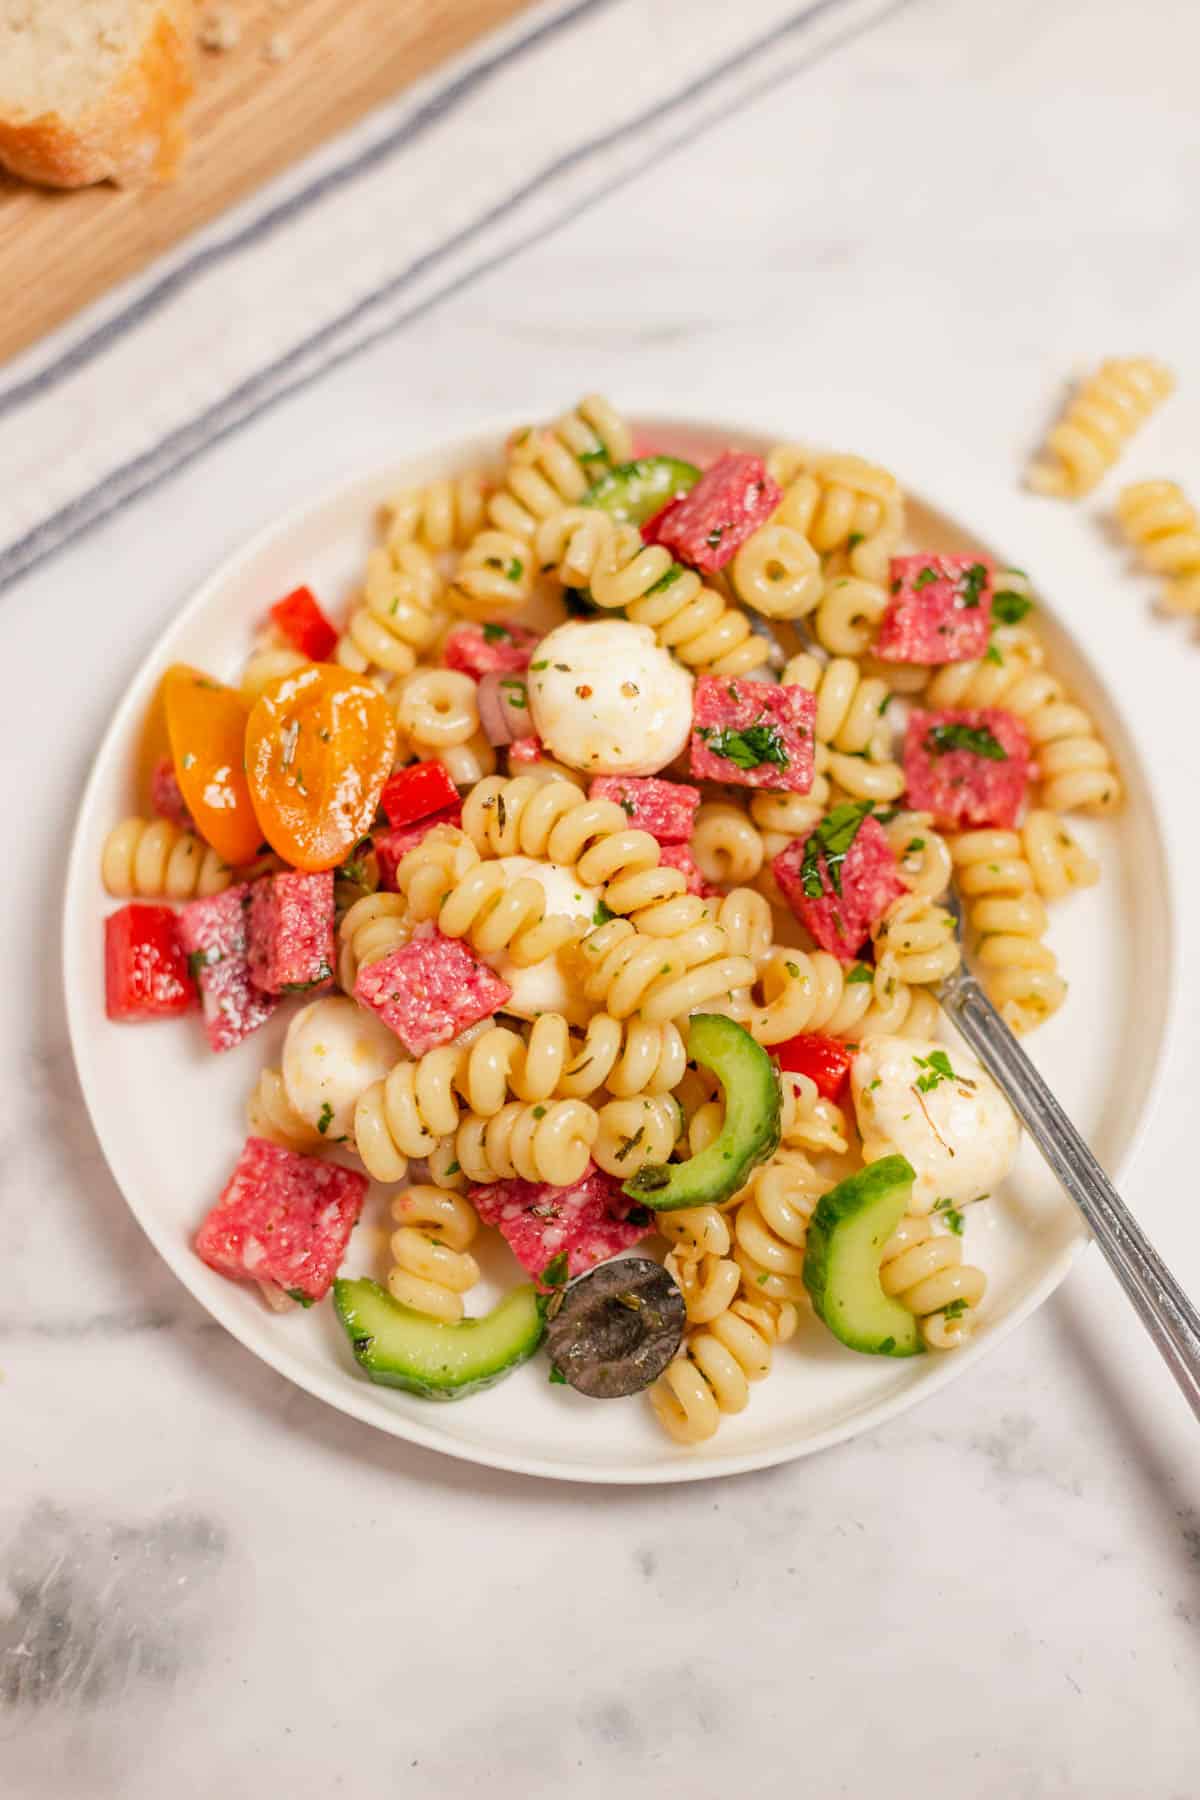 A plate of Italian pasta salad with a fork.